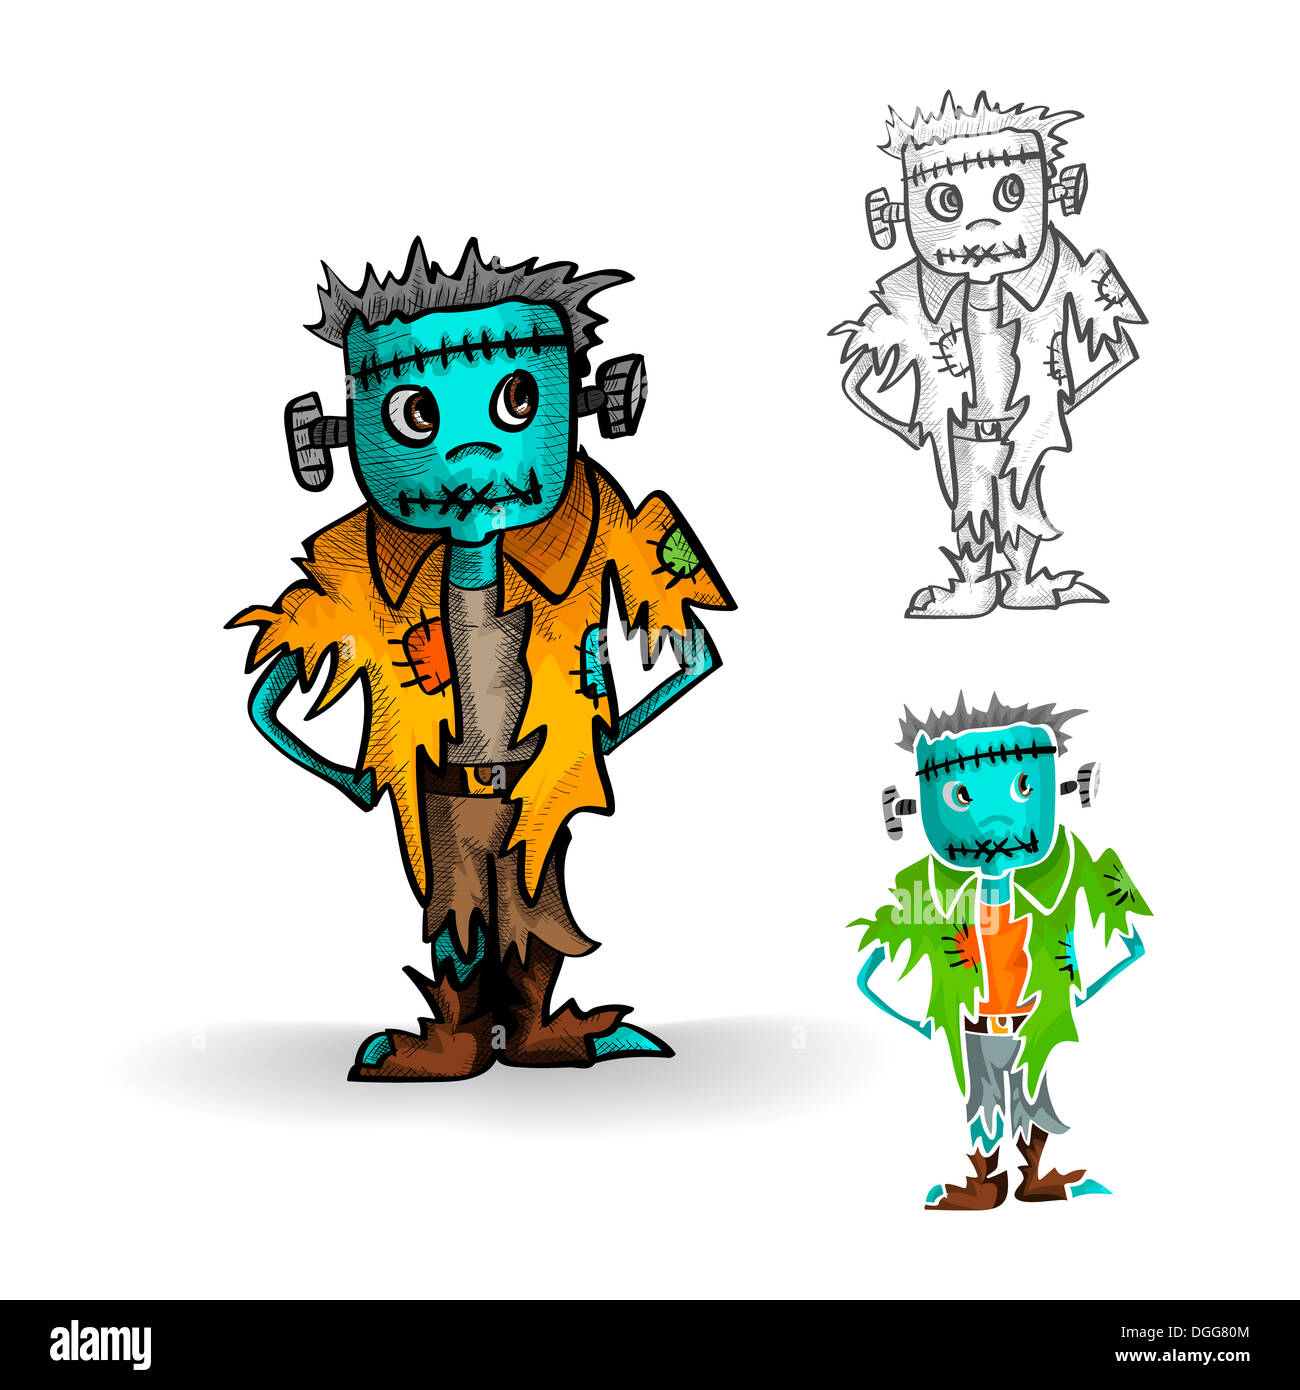 Halloween Monsters isolated spooky hand drawn zombie man set. EPS10 vector file organized in layers for easy editing. Stock Photo